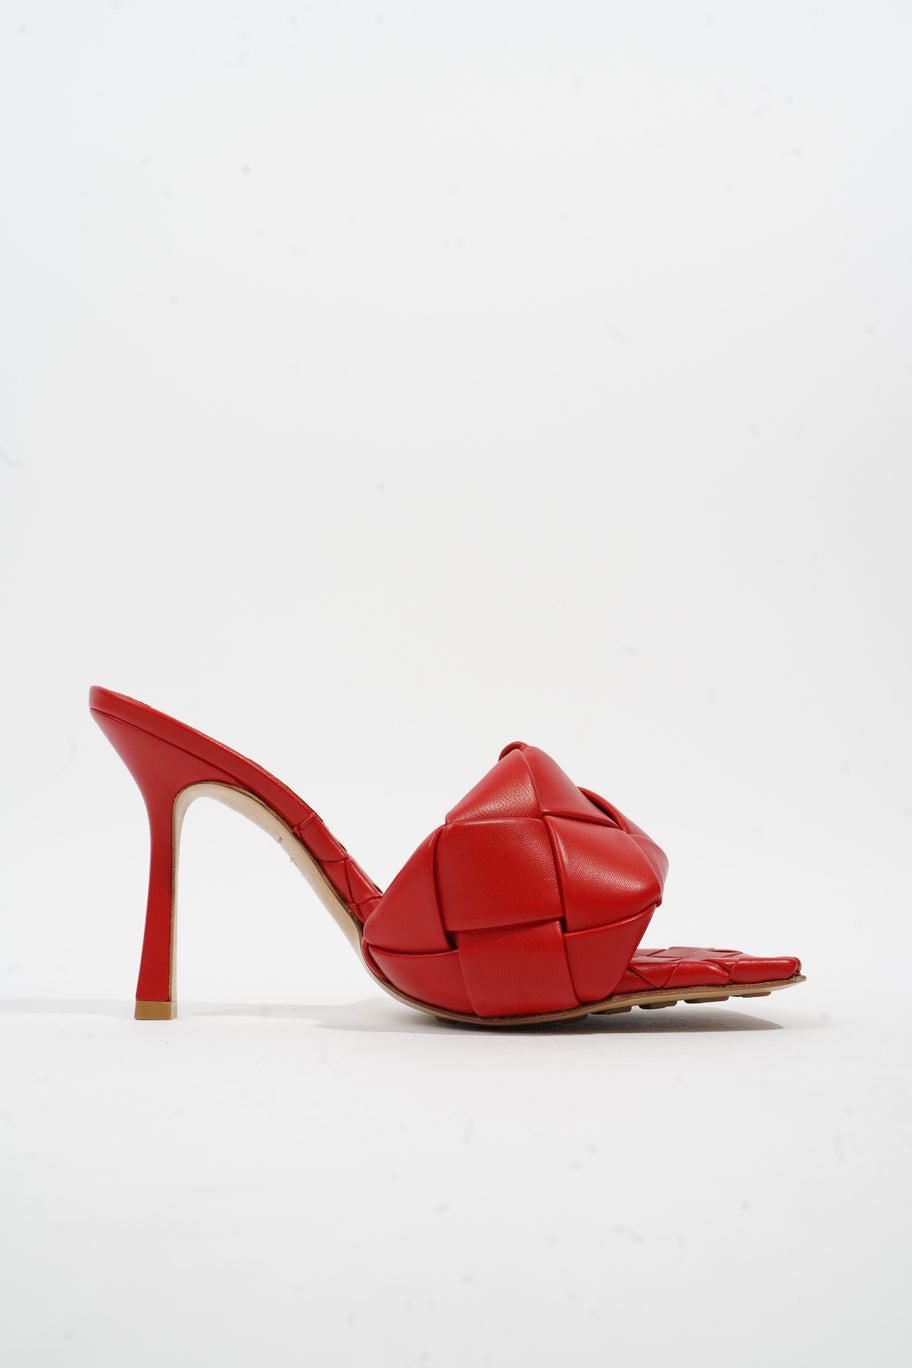 High Sandals 90 Red Leather EU 37.5 UK 4.5 Image 4